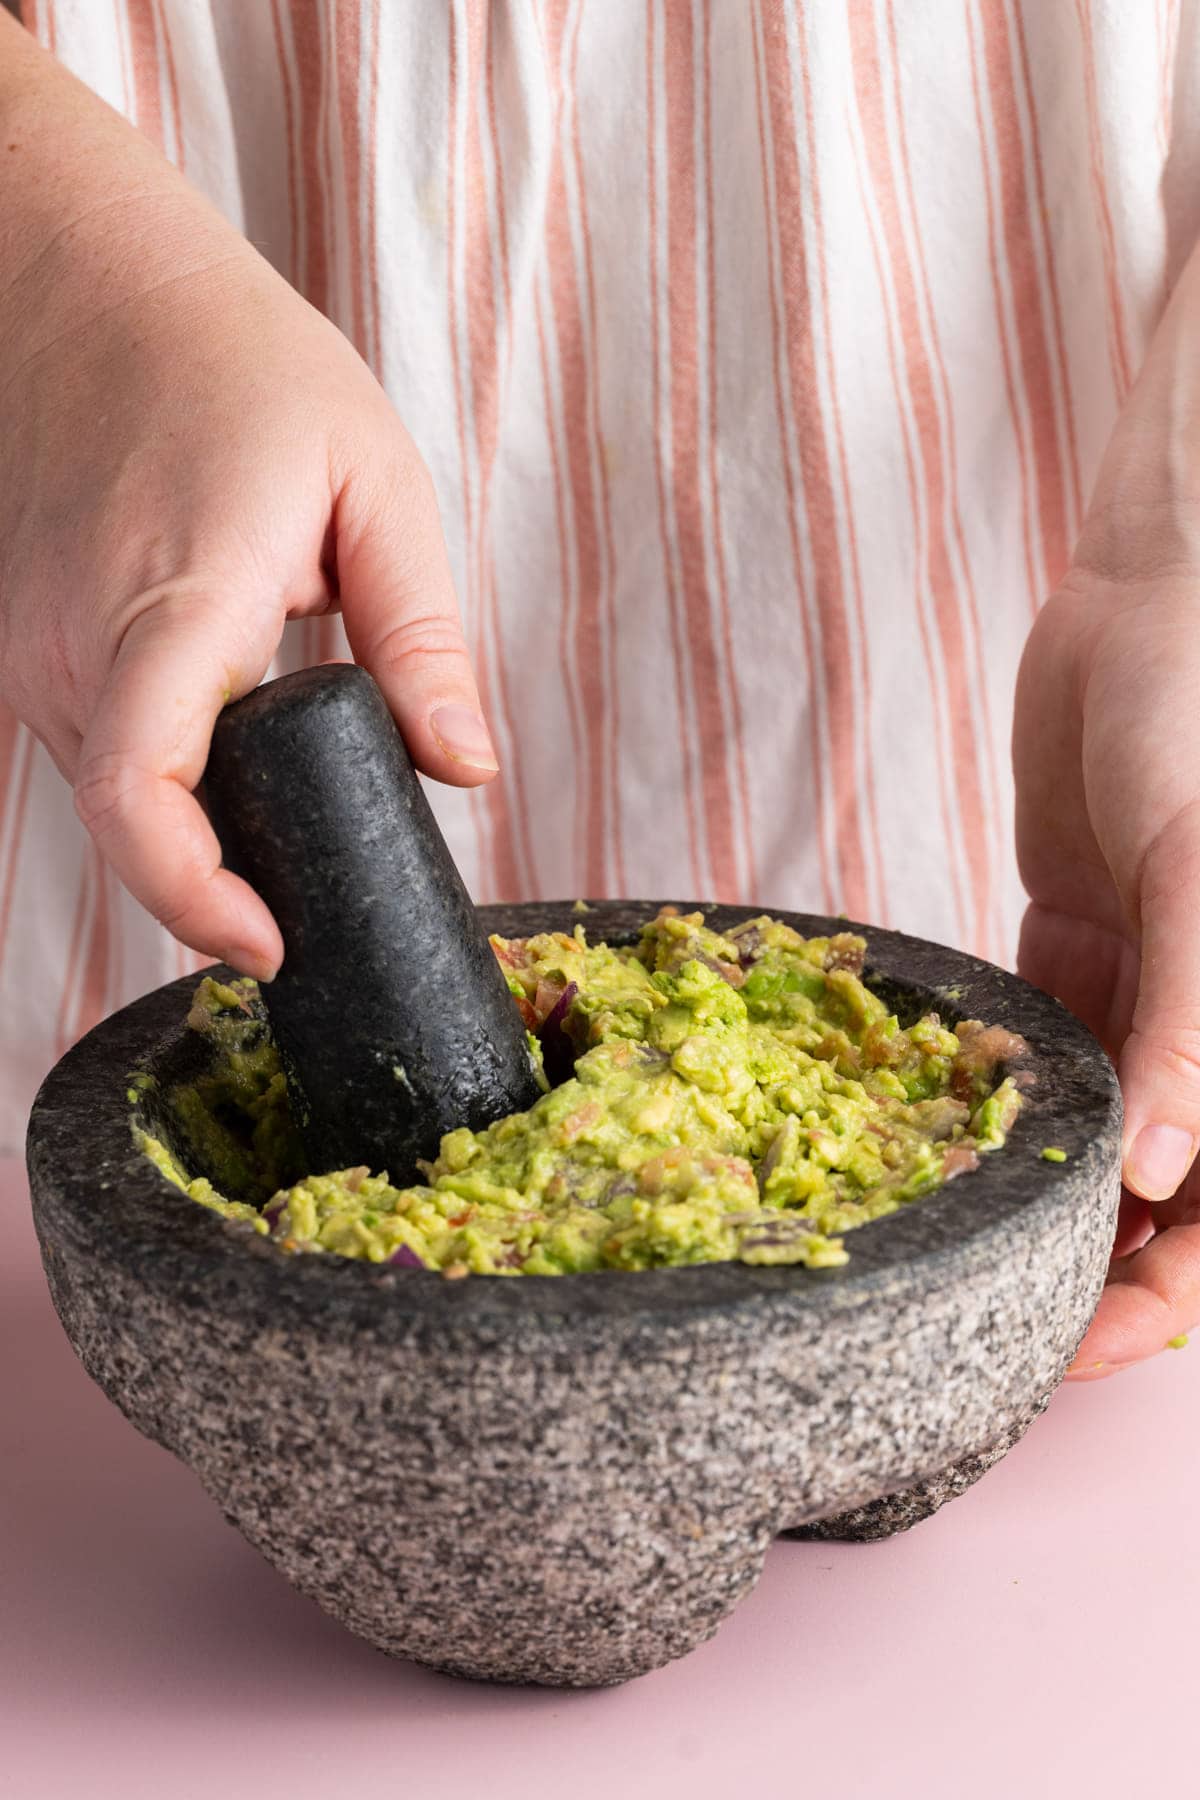 Using pestle to crush avocado with red onion and tomato